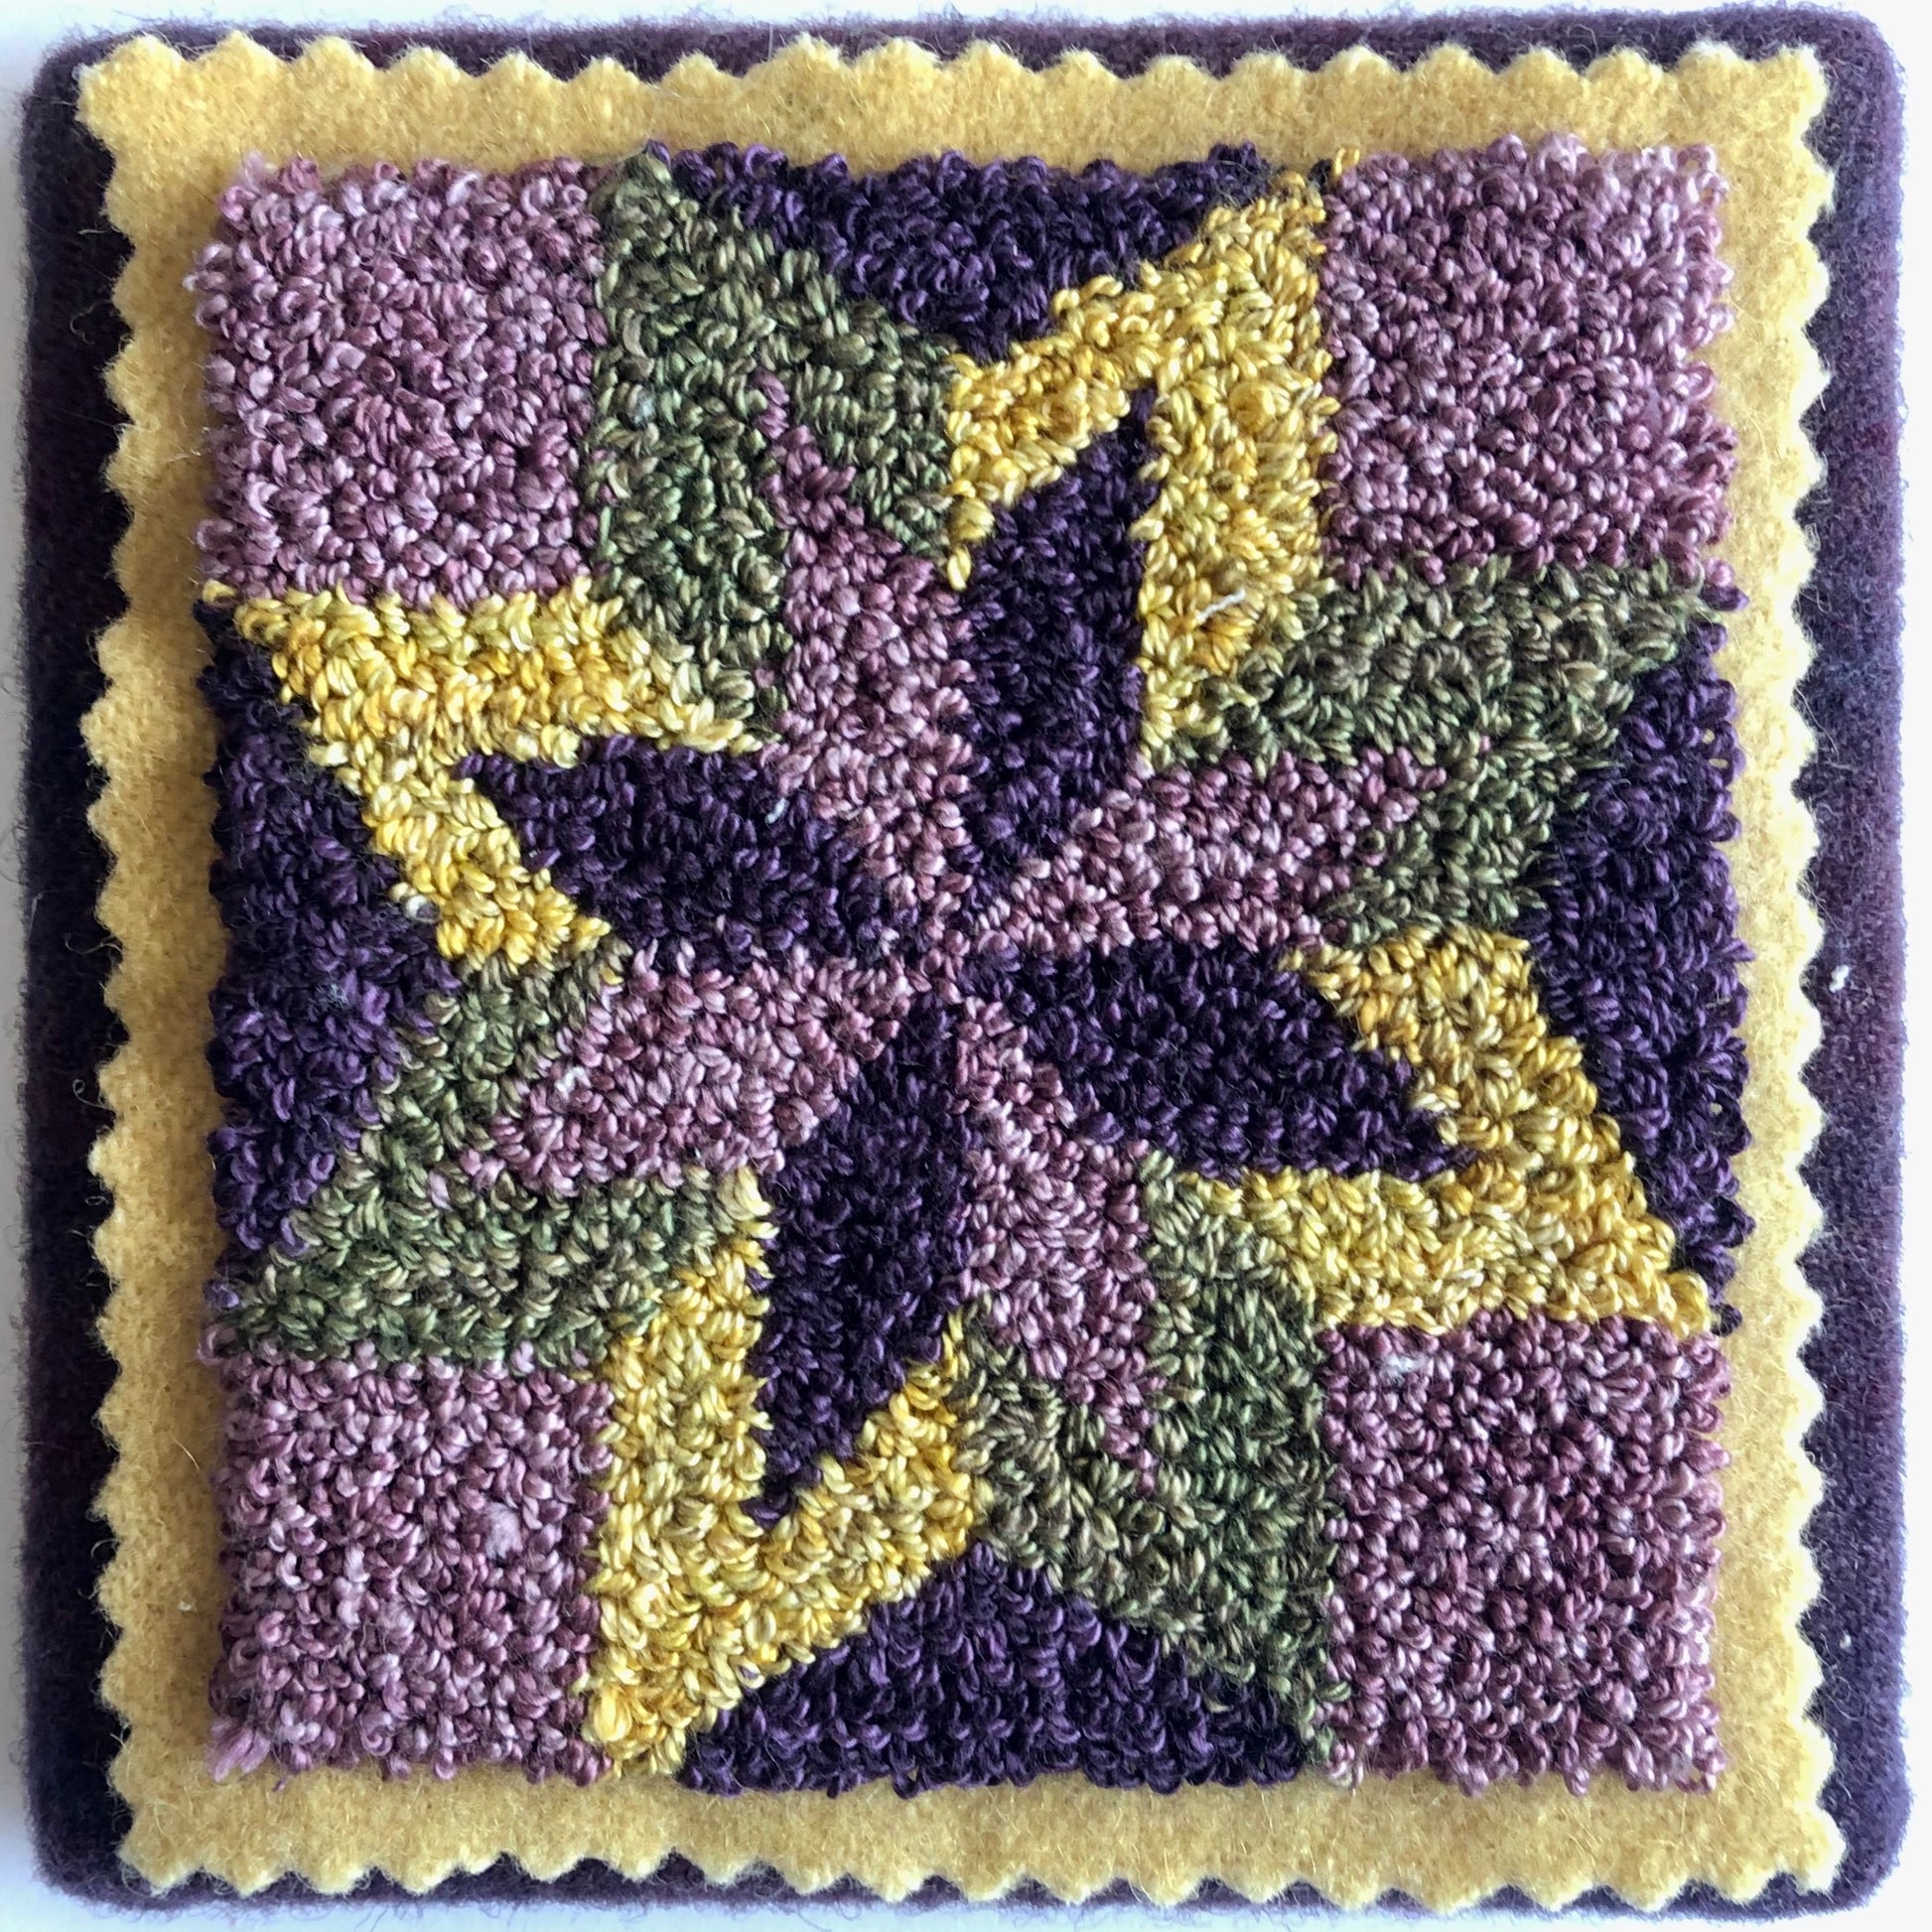 This Mini Star - Punch Needle Pattern by Orphaned Wool contain this lovely barn star design. The pattern on Weavers Cloth Fabric and the Paper Pattern are both included so you can create more patterns.